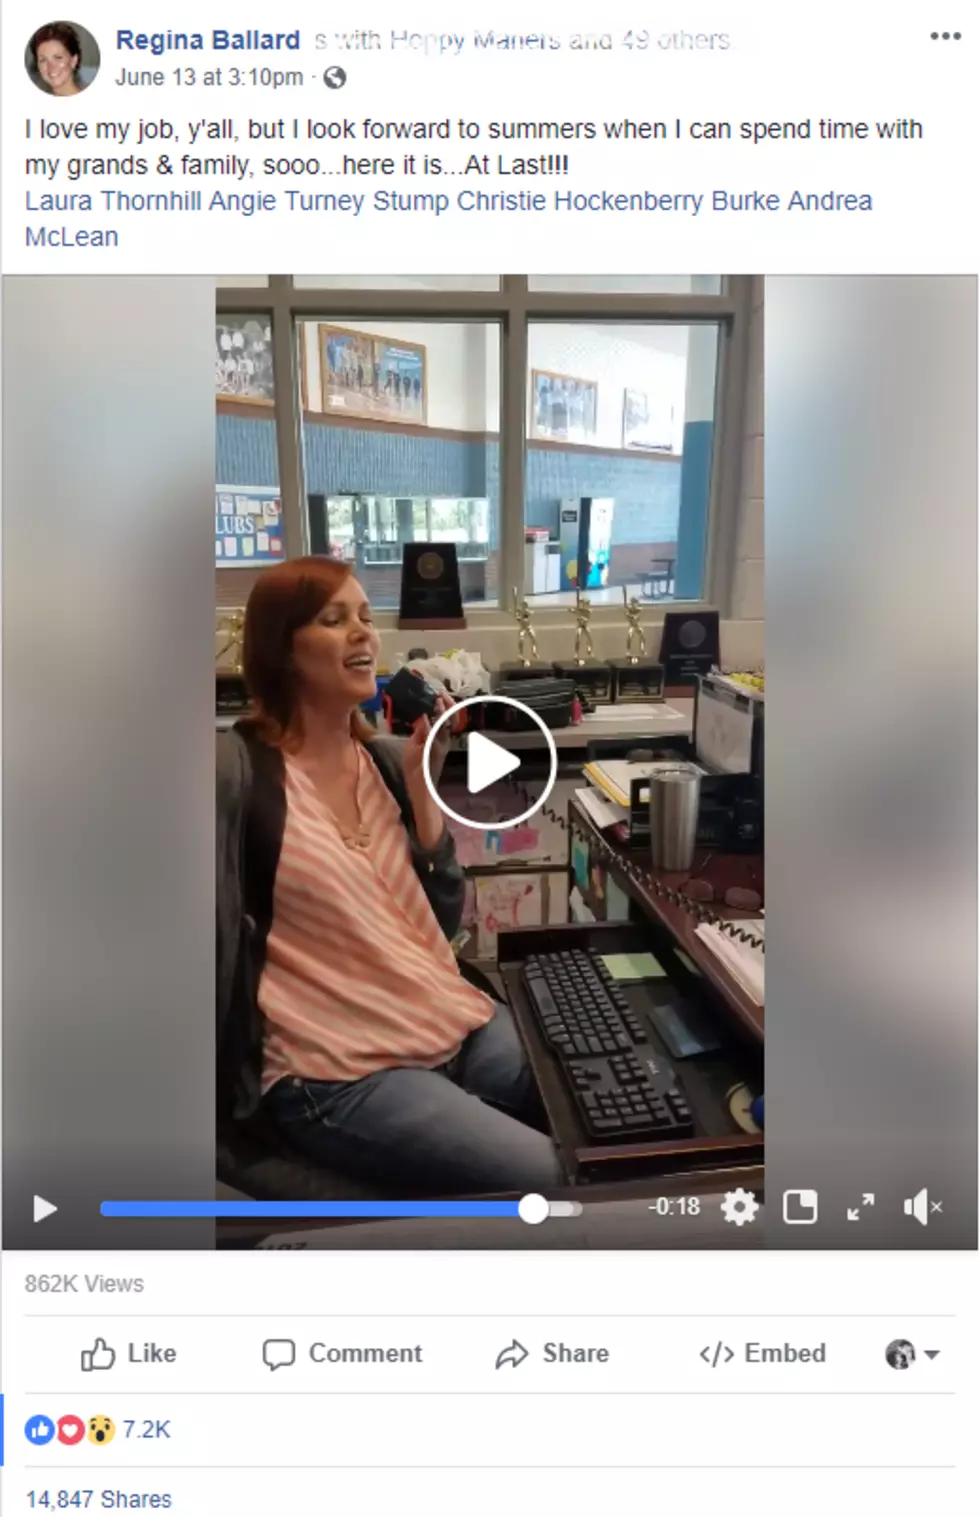 NAILED IT! NC Woman Sings ‘At Last’ Over Intercom To Announce School Break